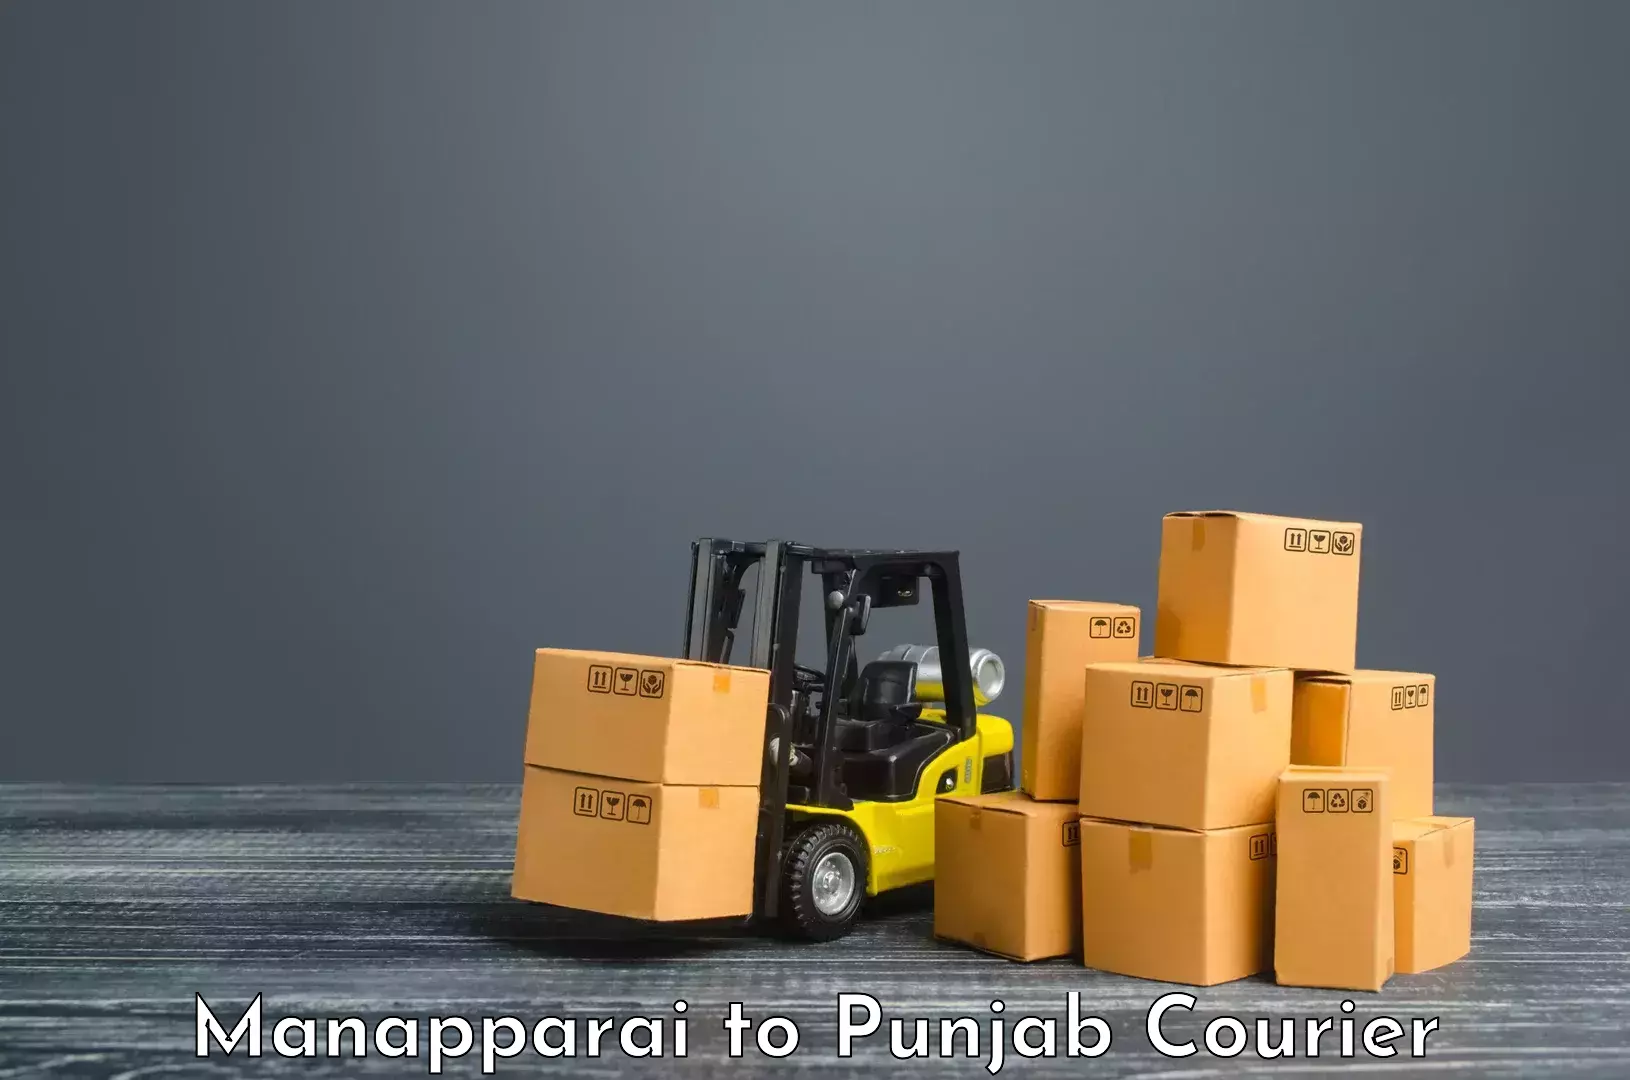 Tailored shipping plans Manapparai to Sirhind Fatehgarh